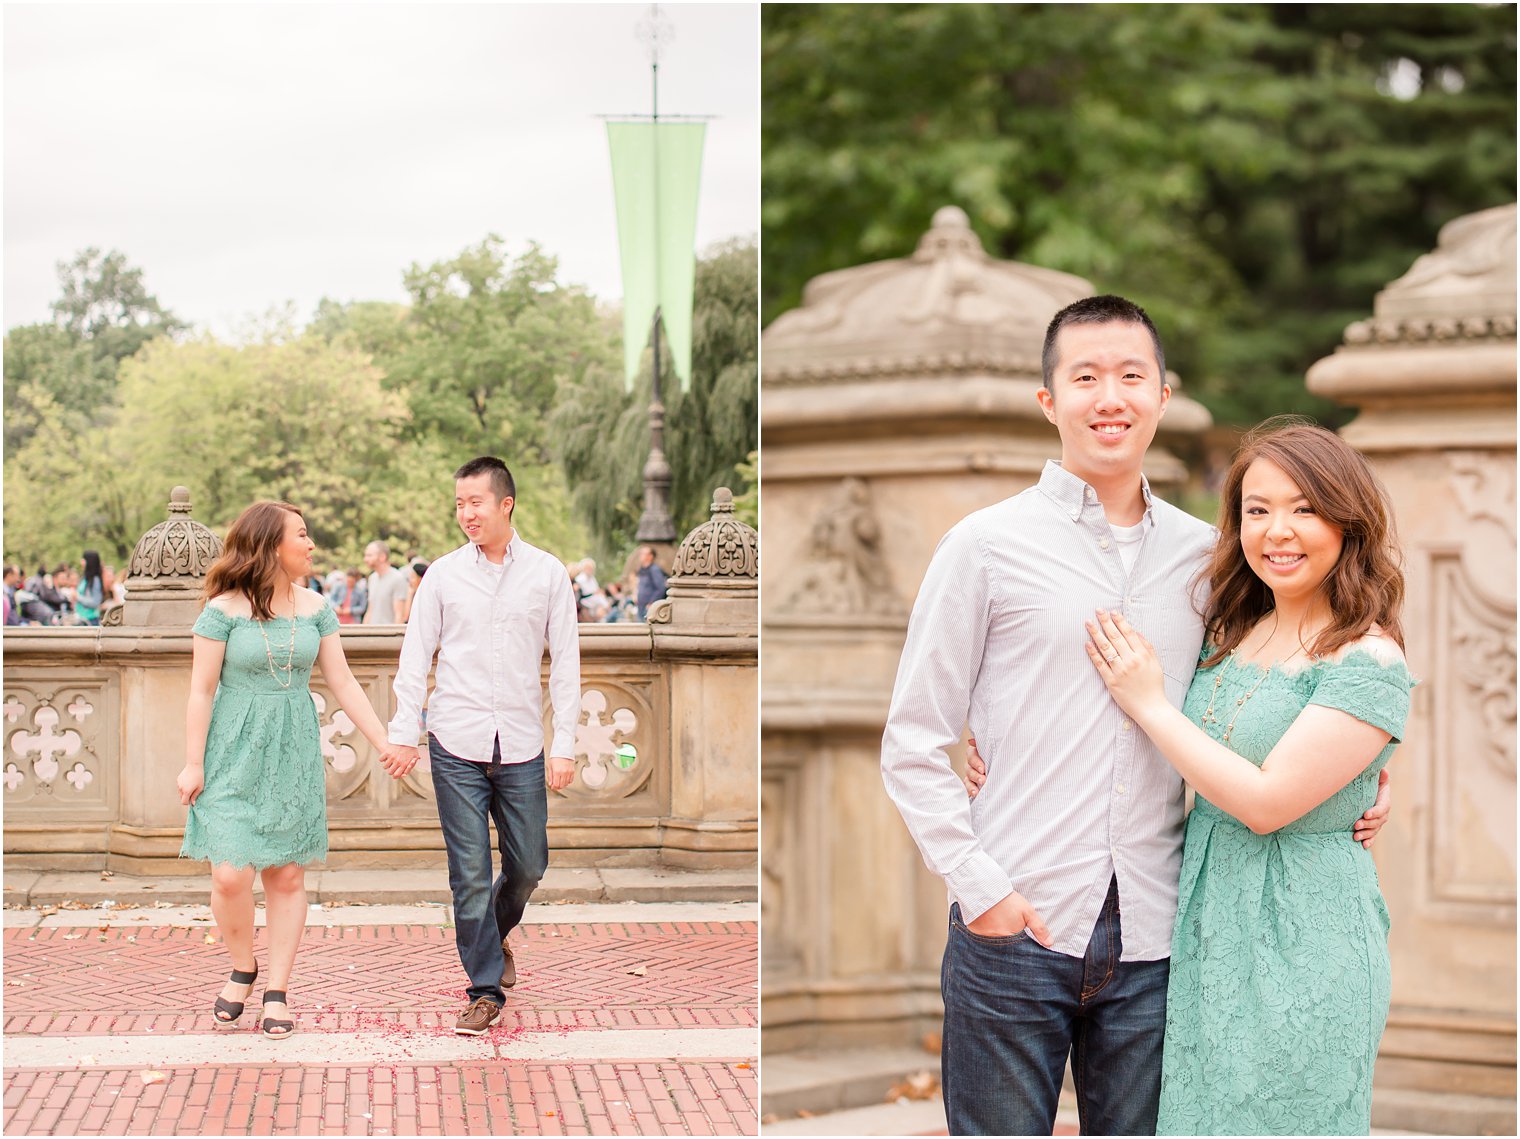 Engagement photos in Central Park by Idalia Photography